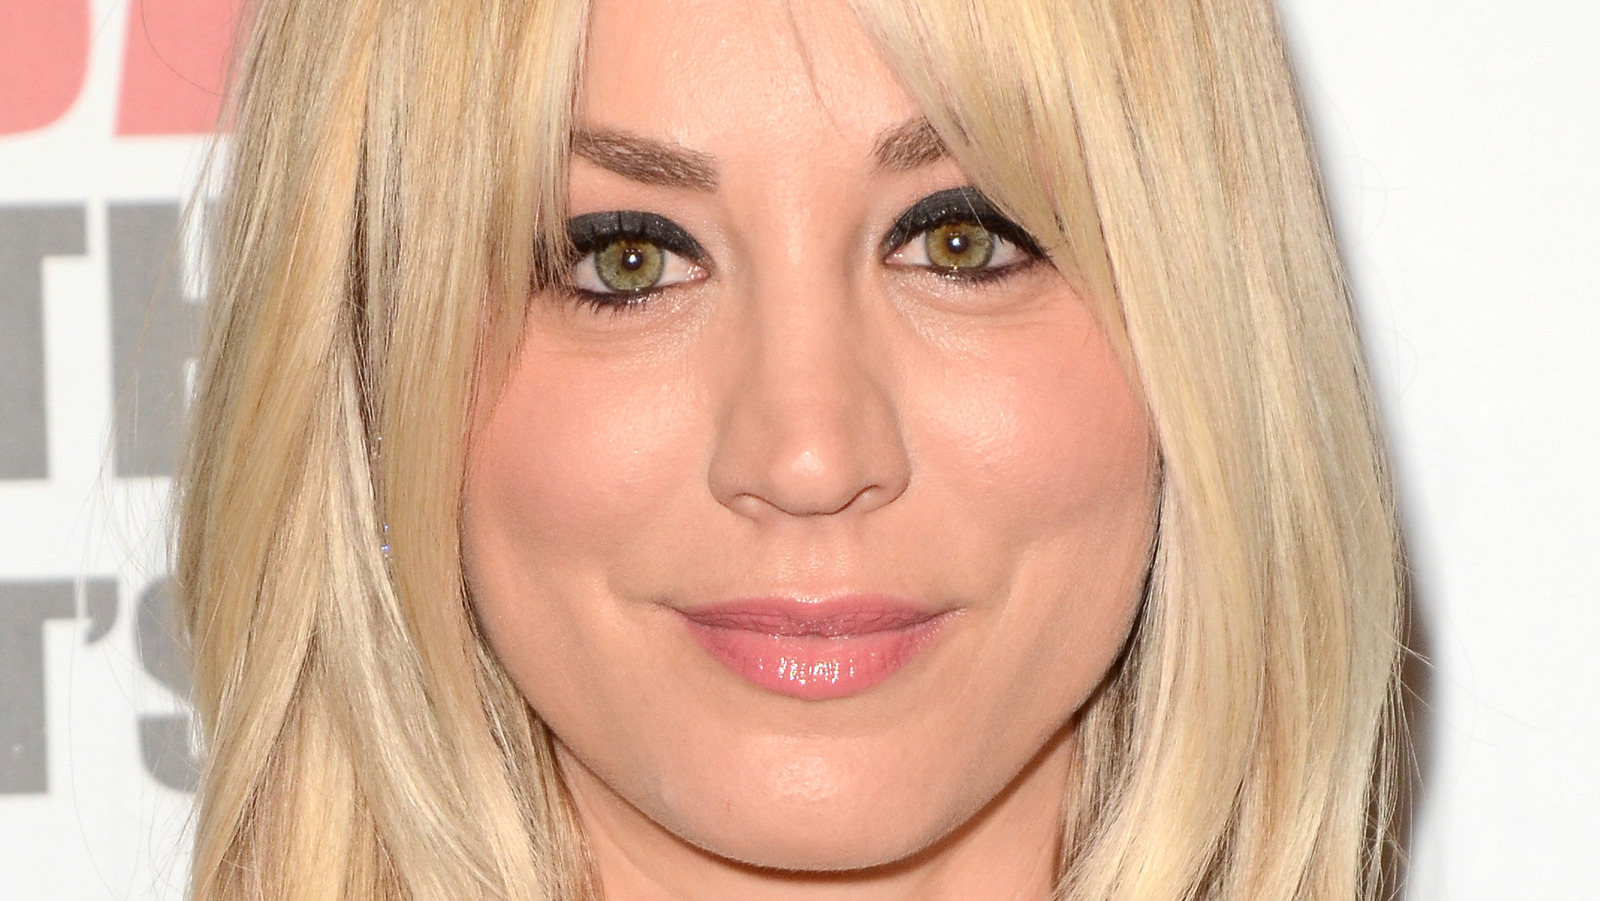 The Unexpected Age Difference Between Johnny Galecki And Kaley Cuoco From The Big Bang Theory